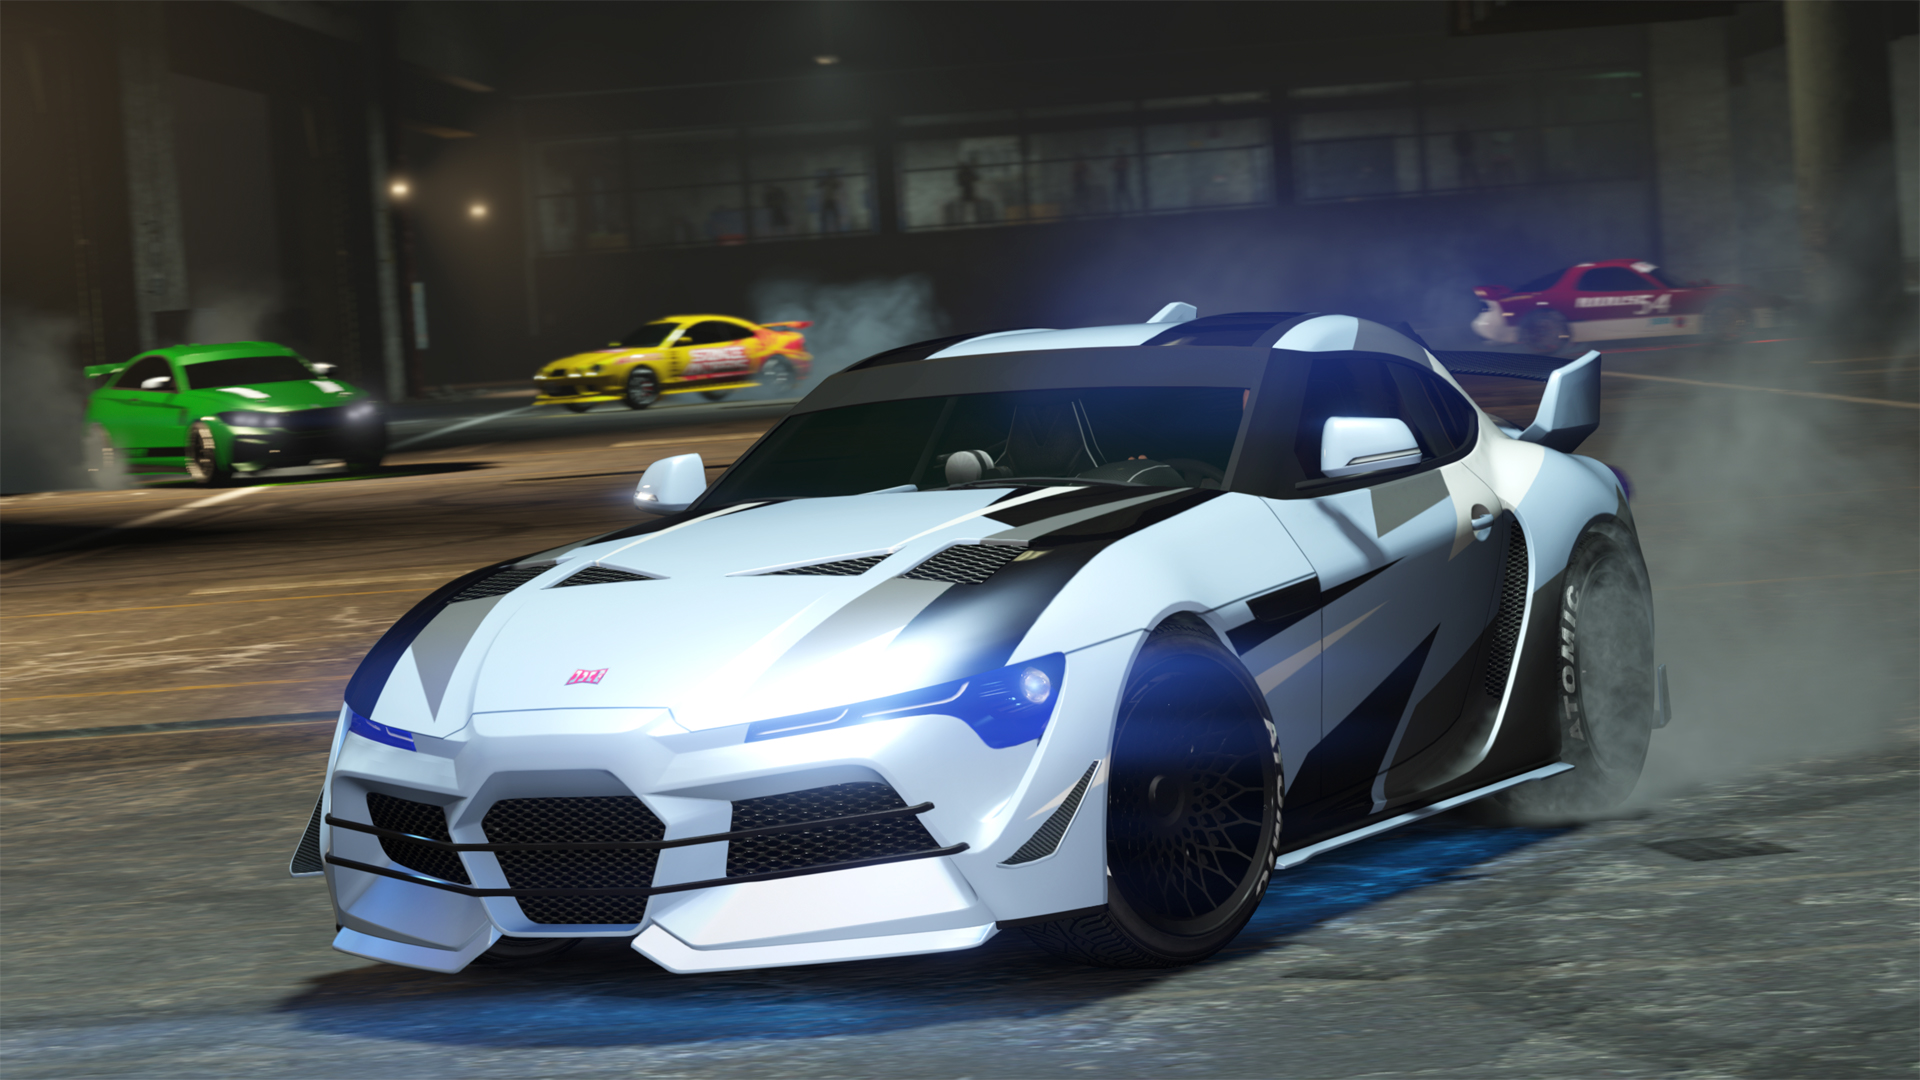 GTA Los Santos Tuners Prize Ride challenges – what is the Prize Ride?